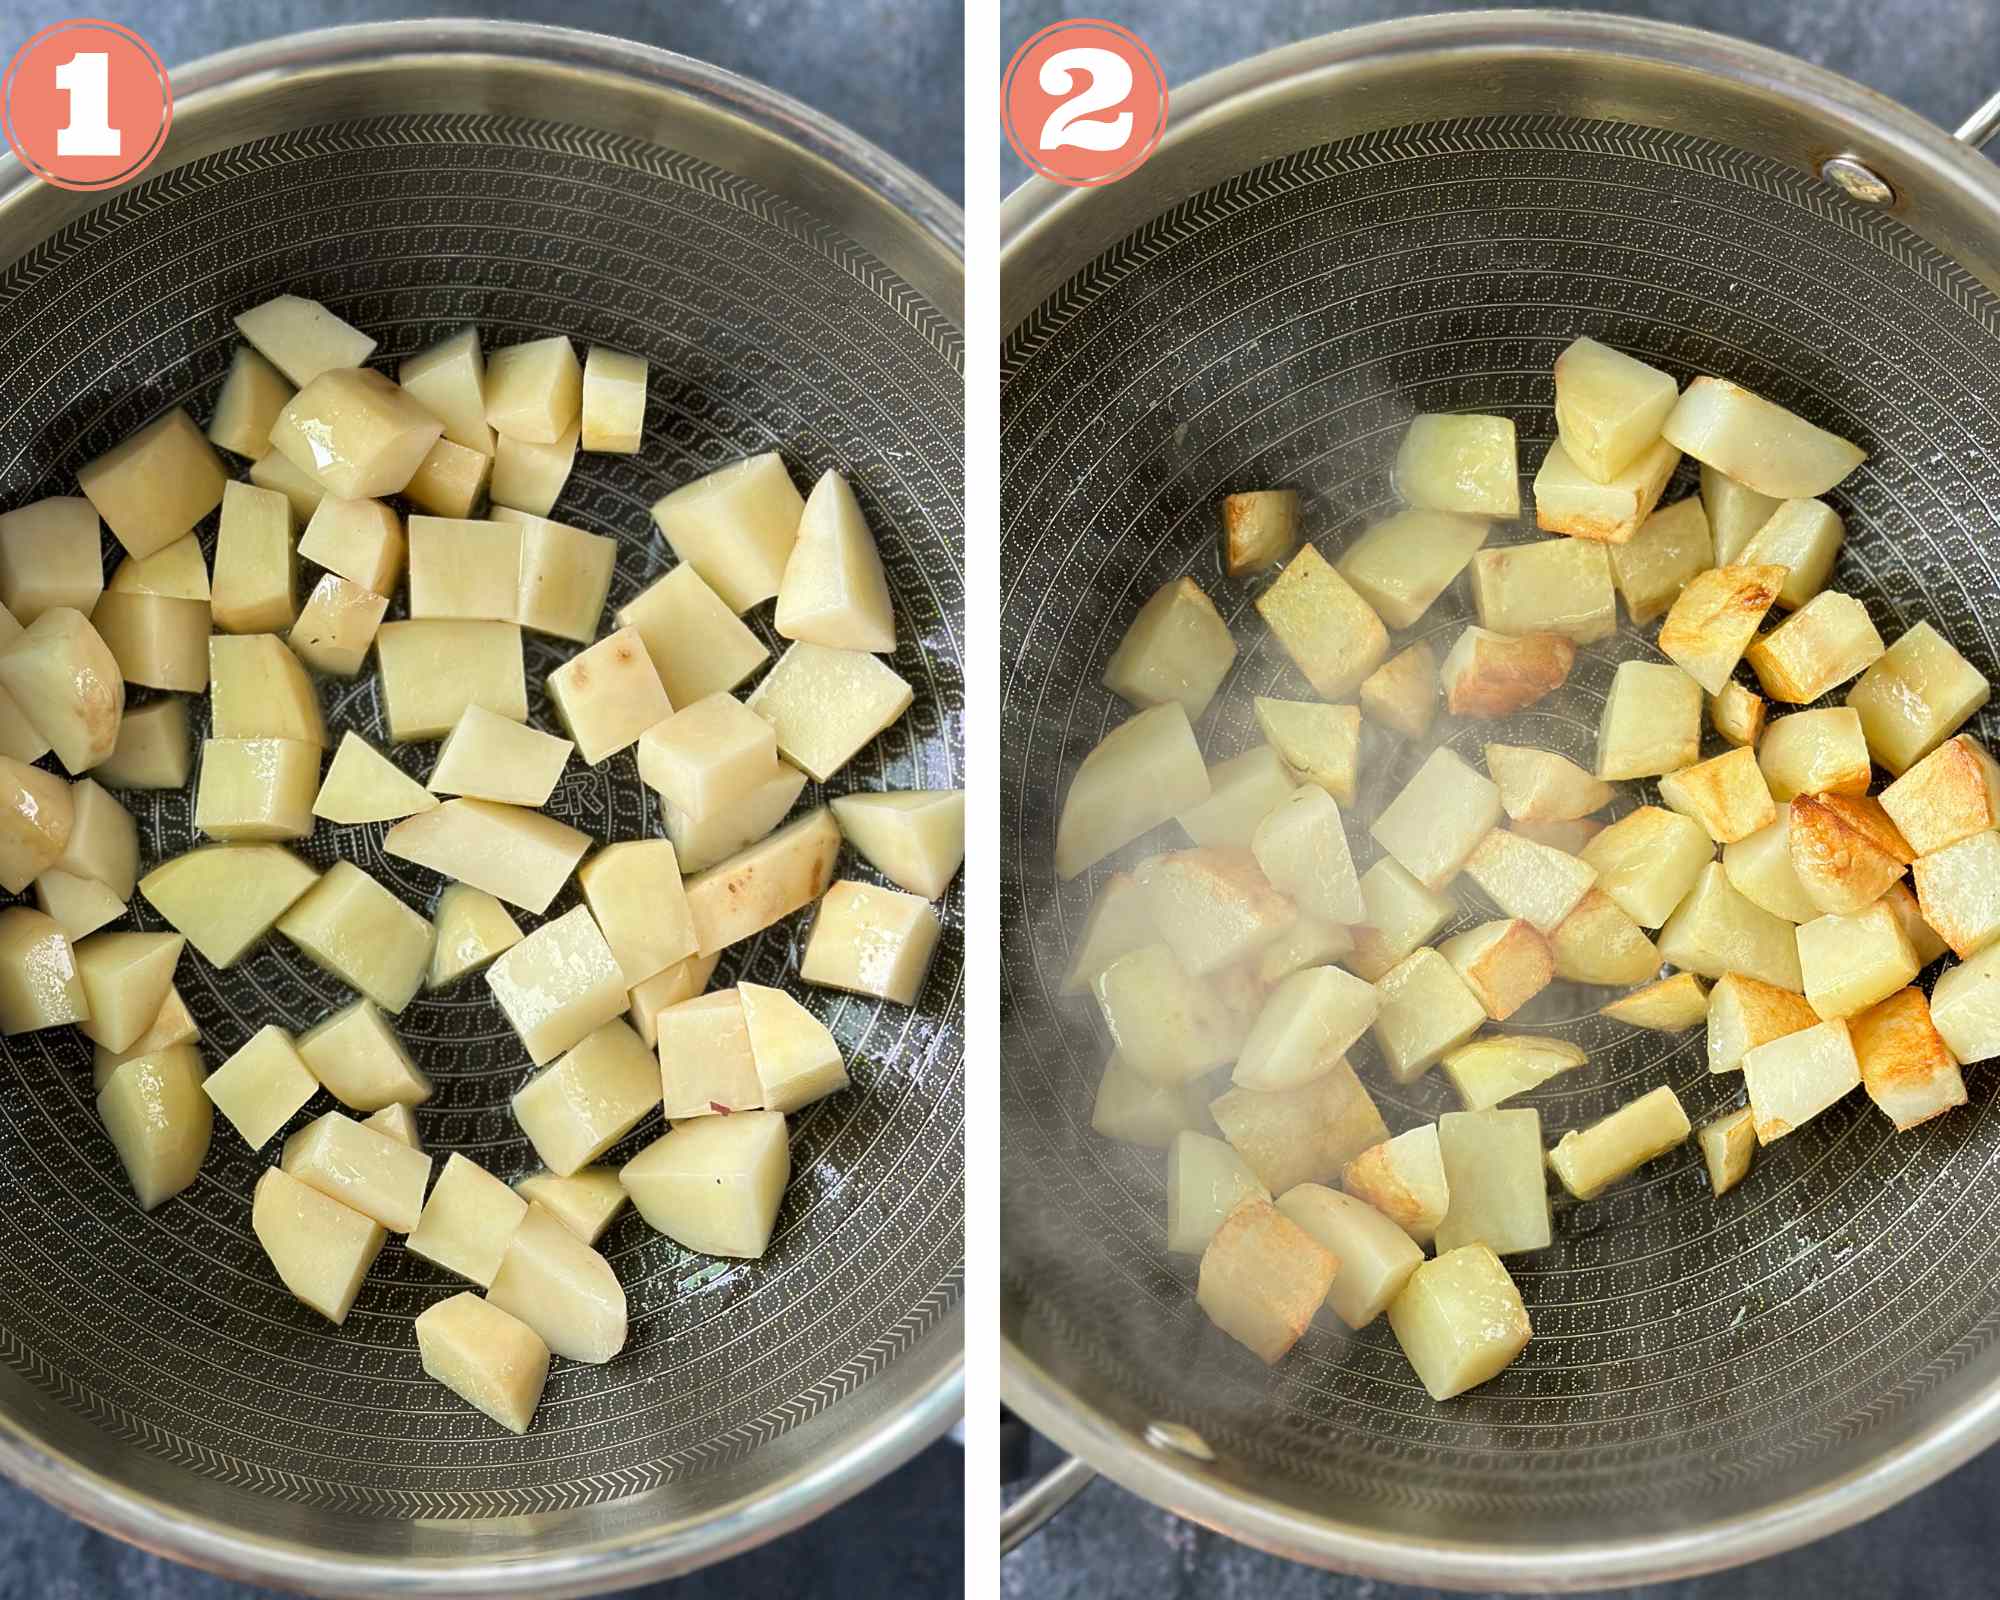 Add potatoes to oil and sauté till they are crips on the outside.